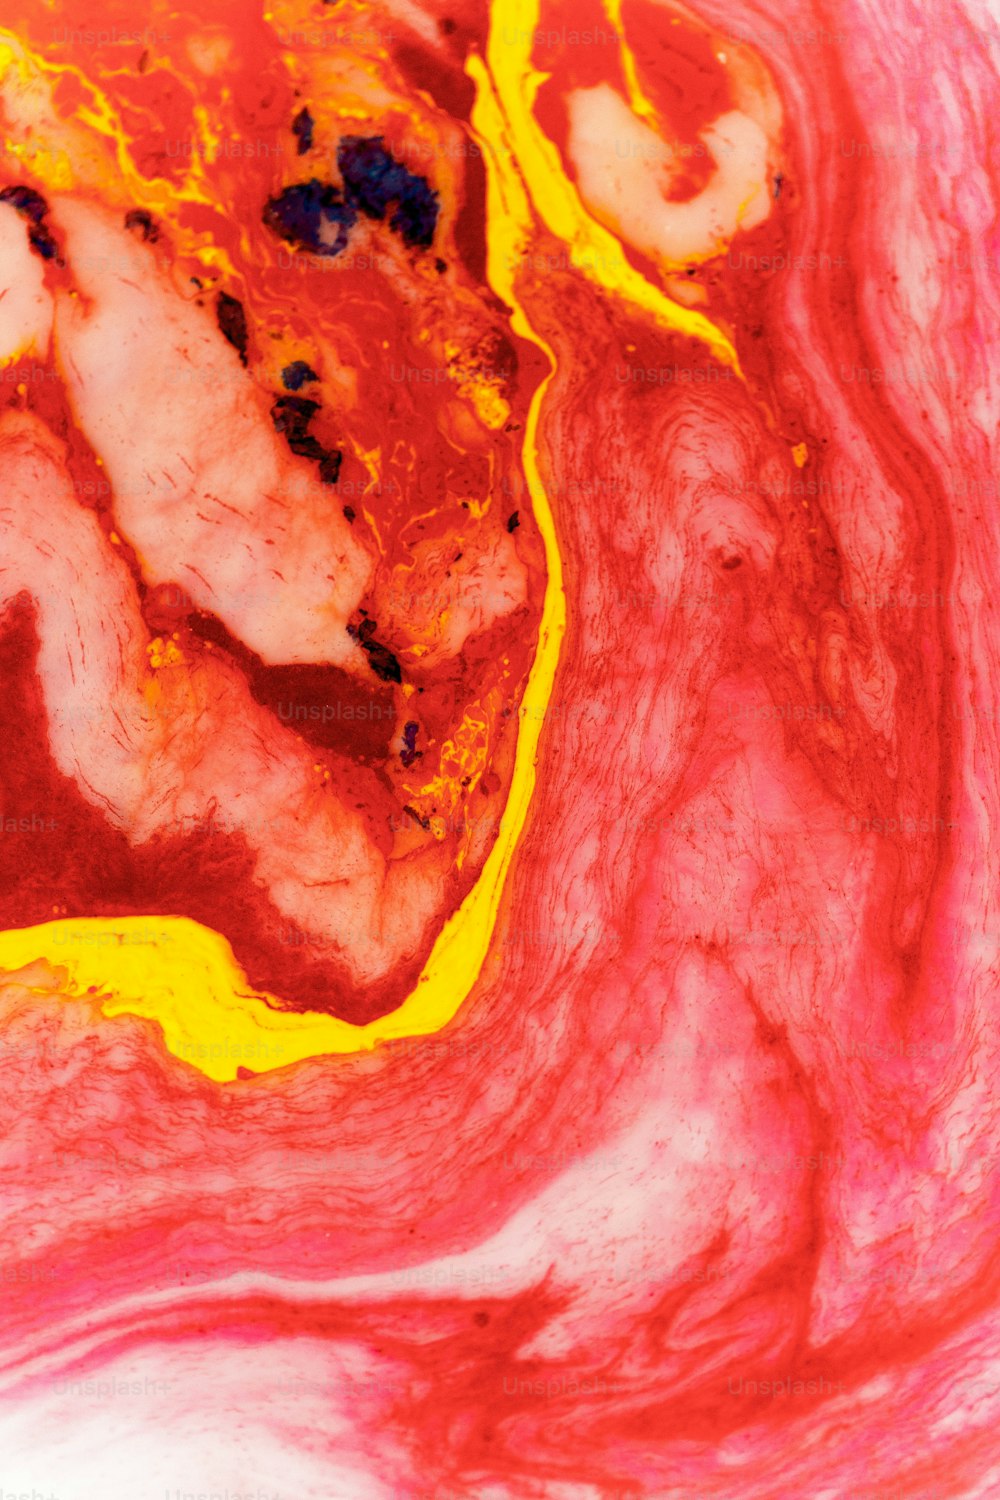 a close up of a red and yellow substance